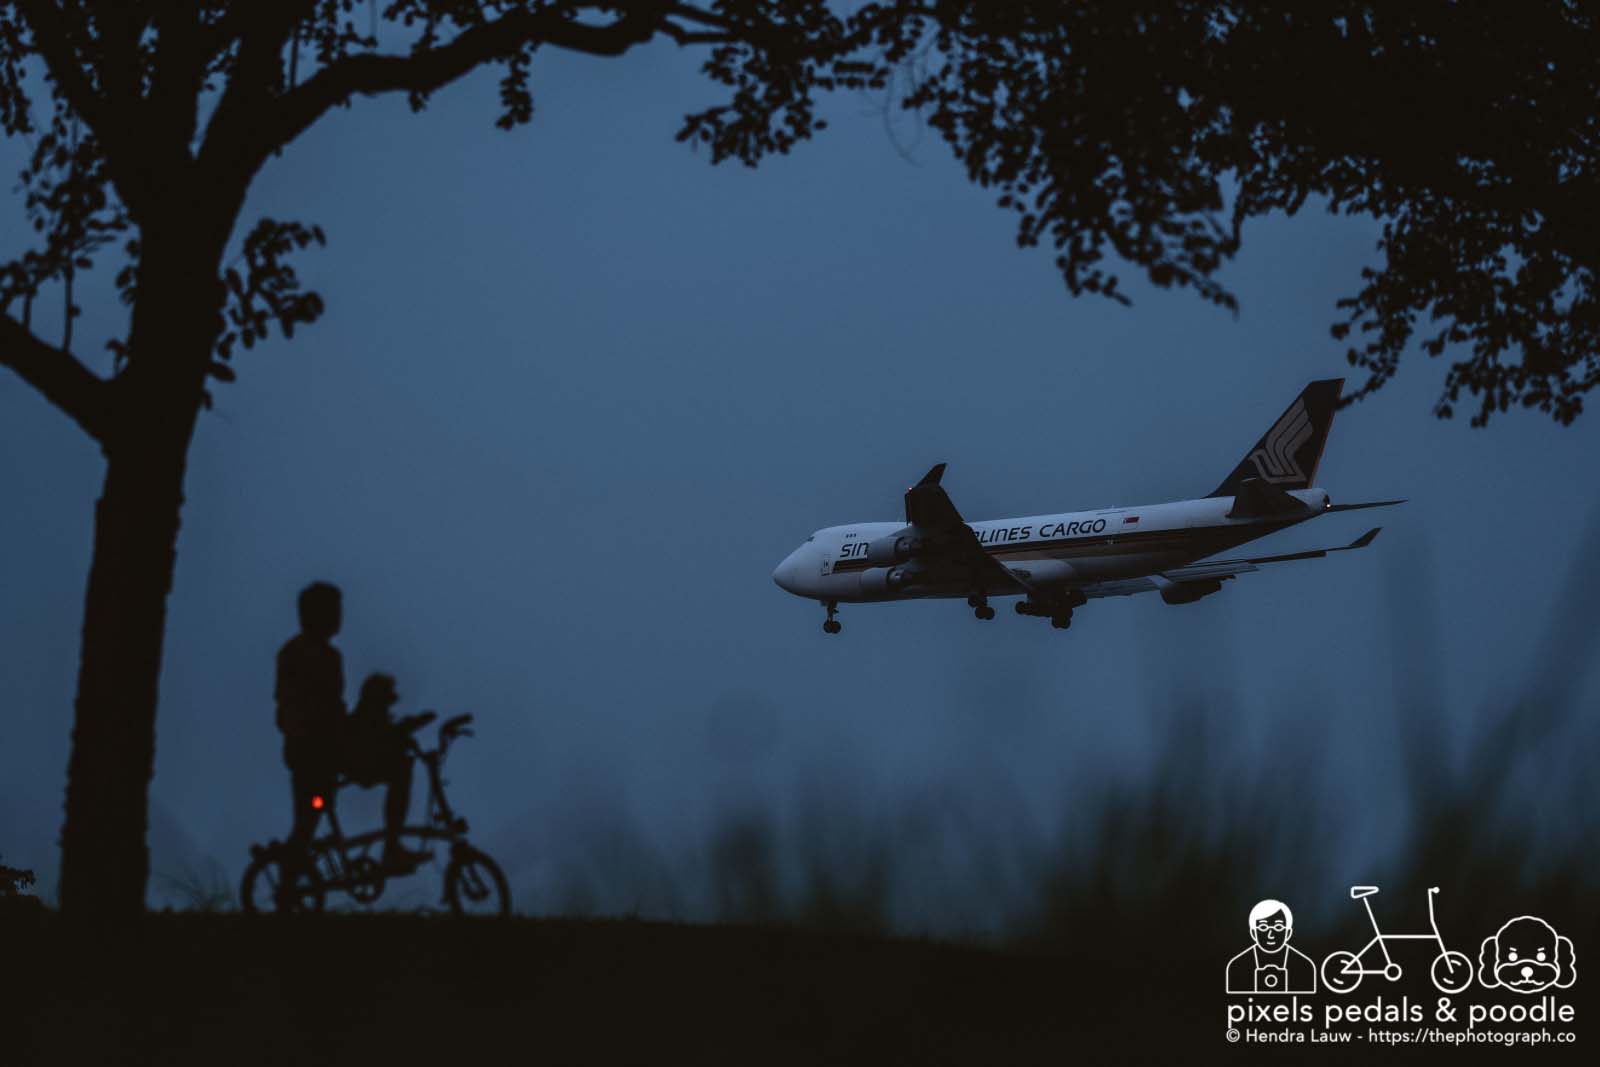 Plane Spotting SIA Cargo 9V-SFM by Pixels Pedals and Poodle 20230416